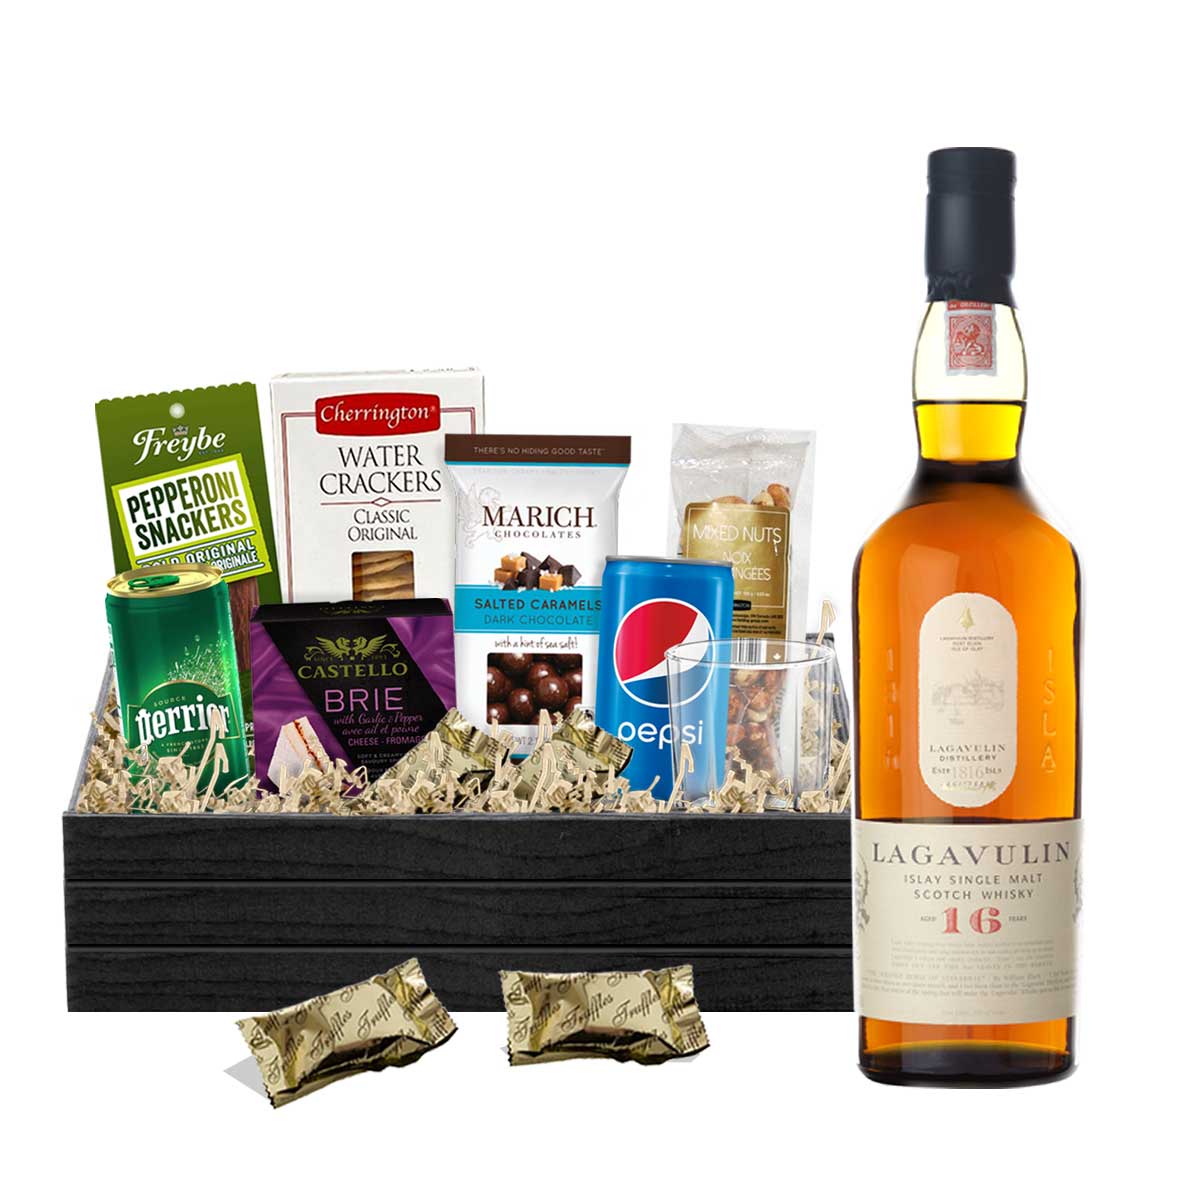 TAG Liquor Stores BC - Lagavulin 16 Year Old Scotch Whisky 750ml Gift Basket